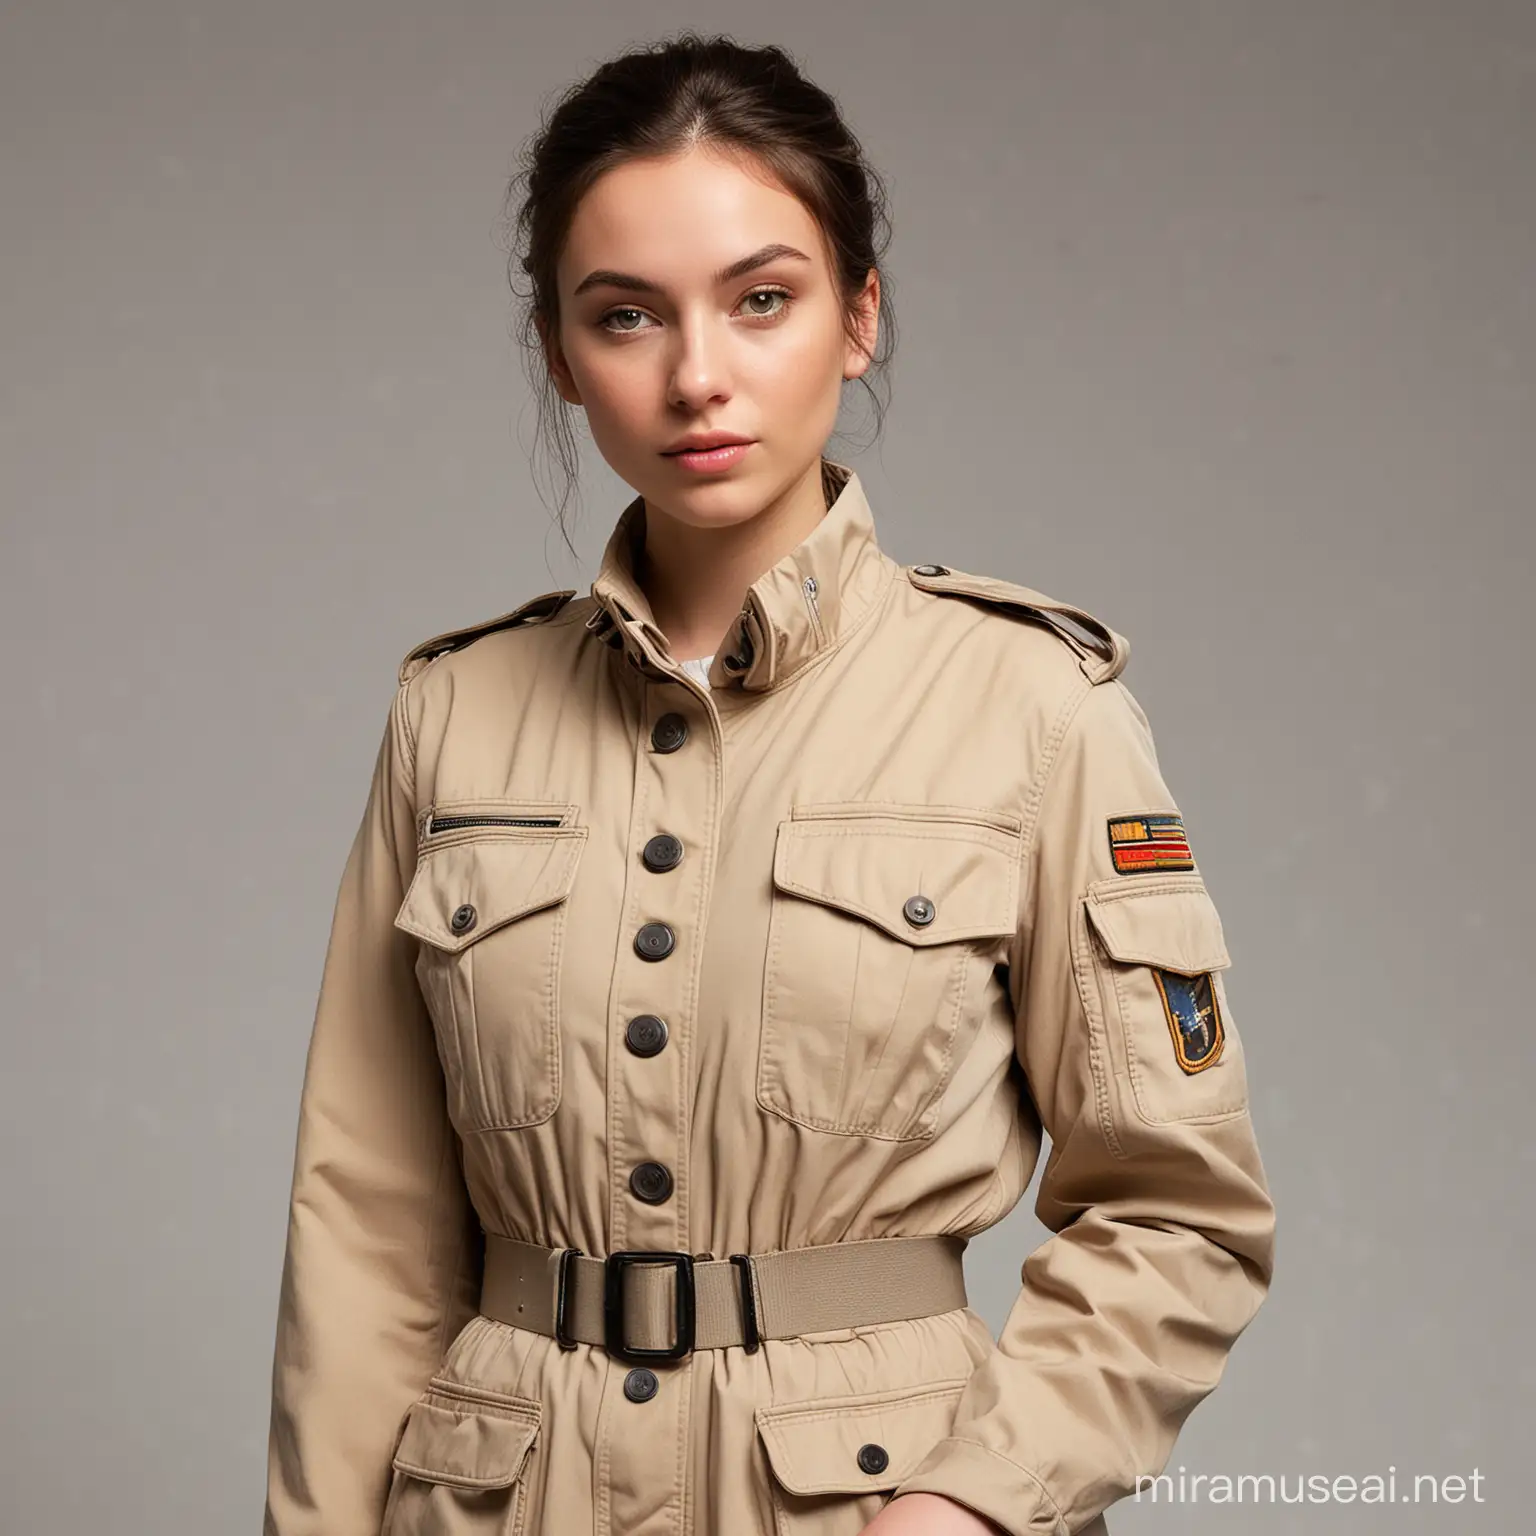 Futuristic Young Woman in Beige Military Jacket